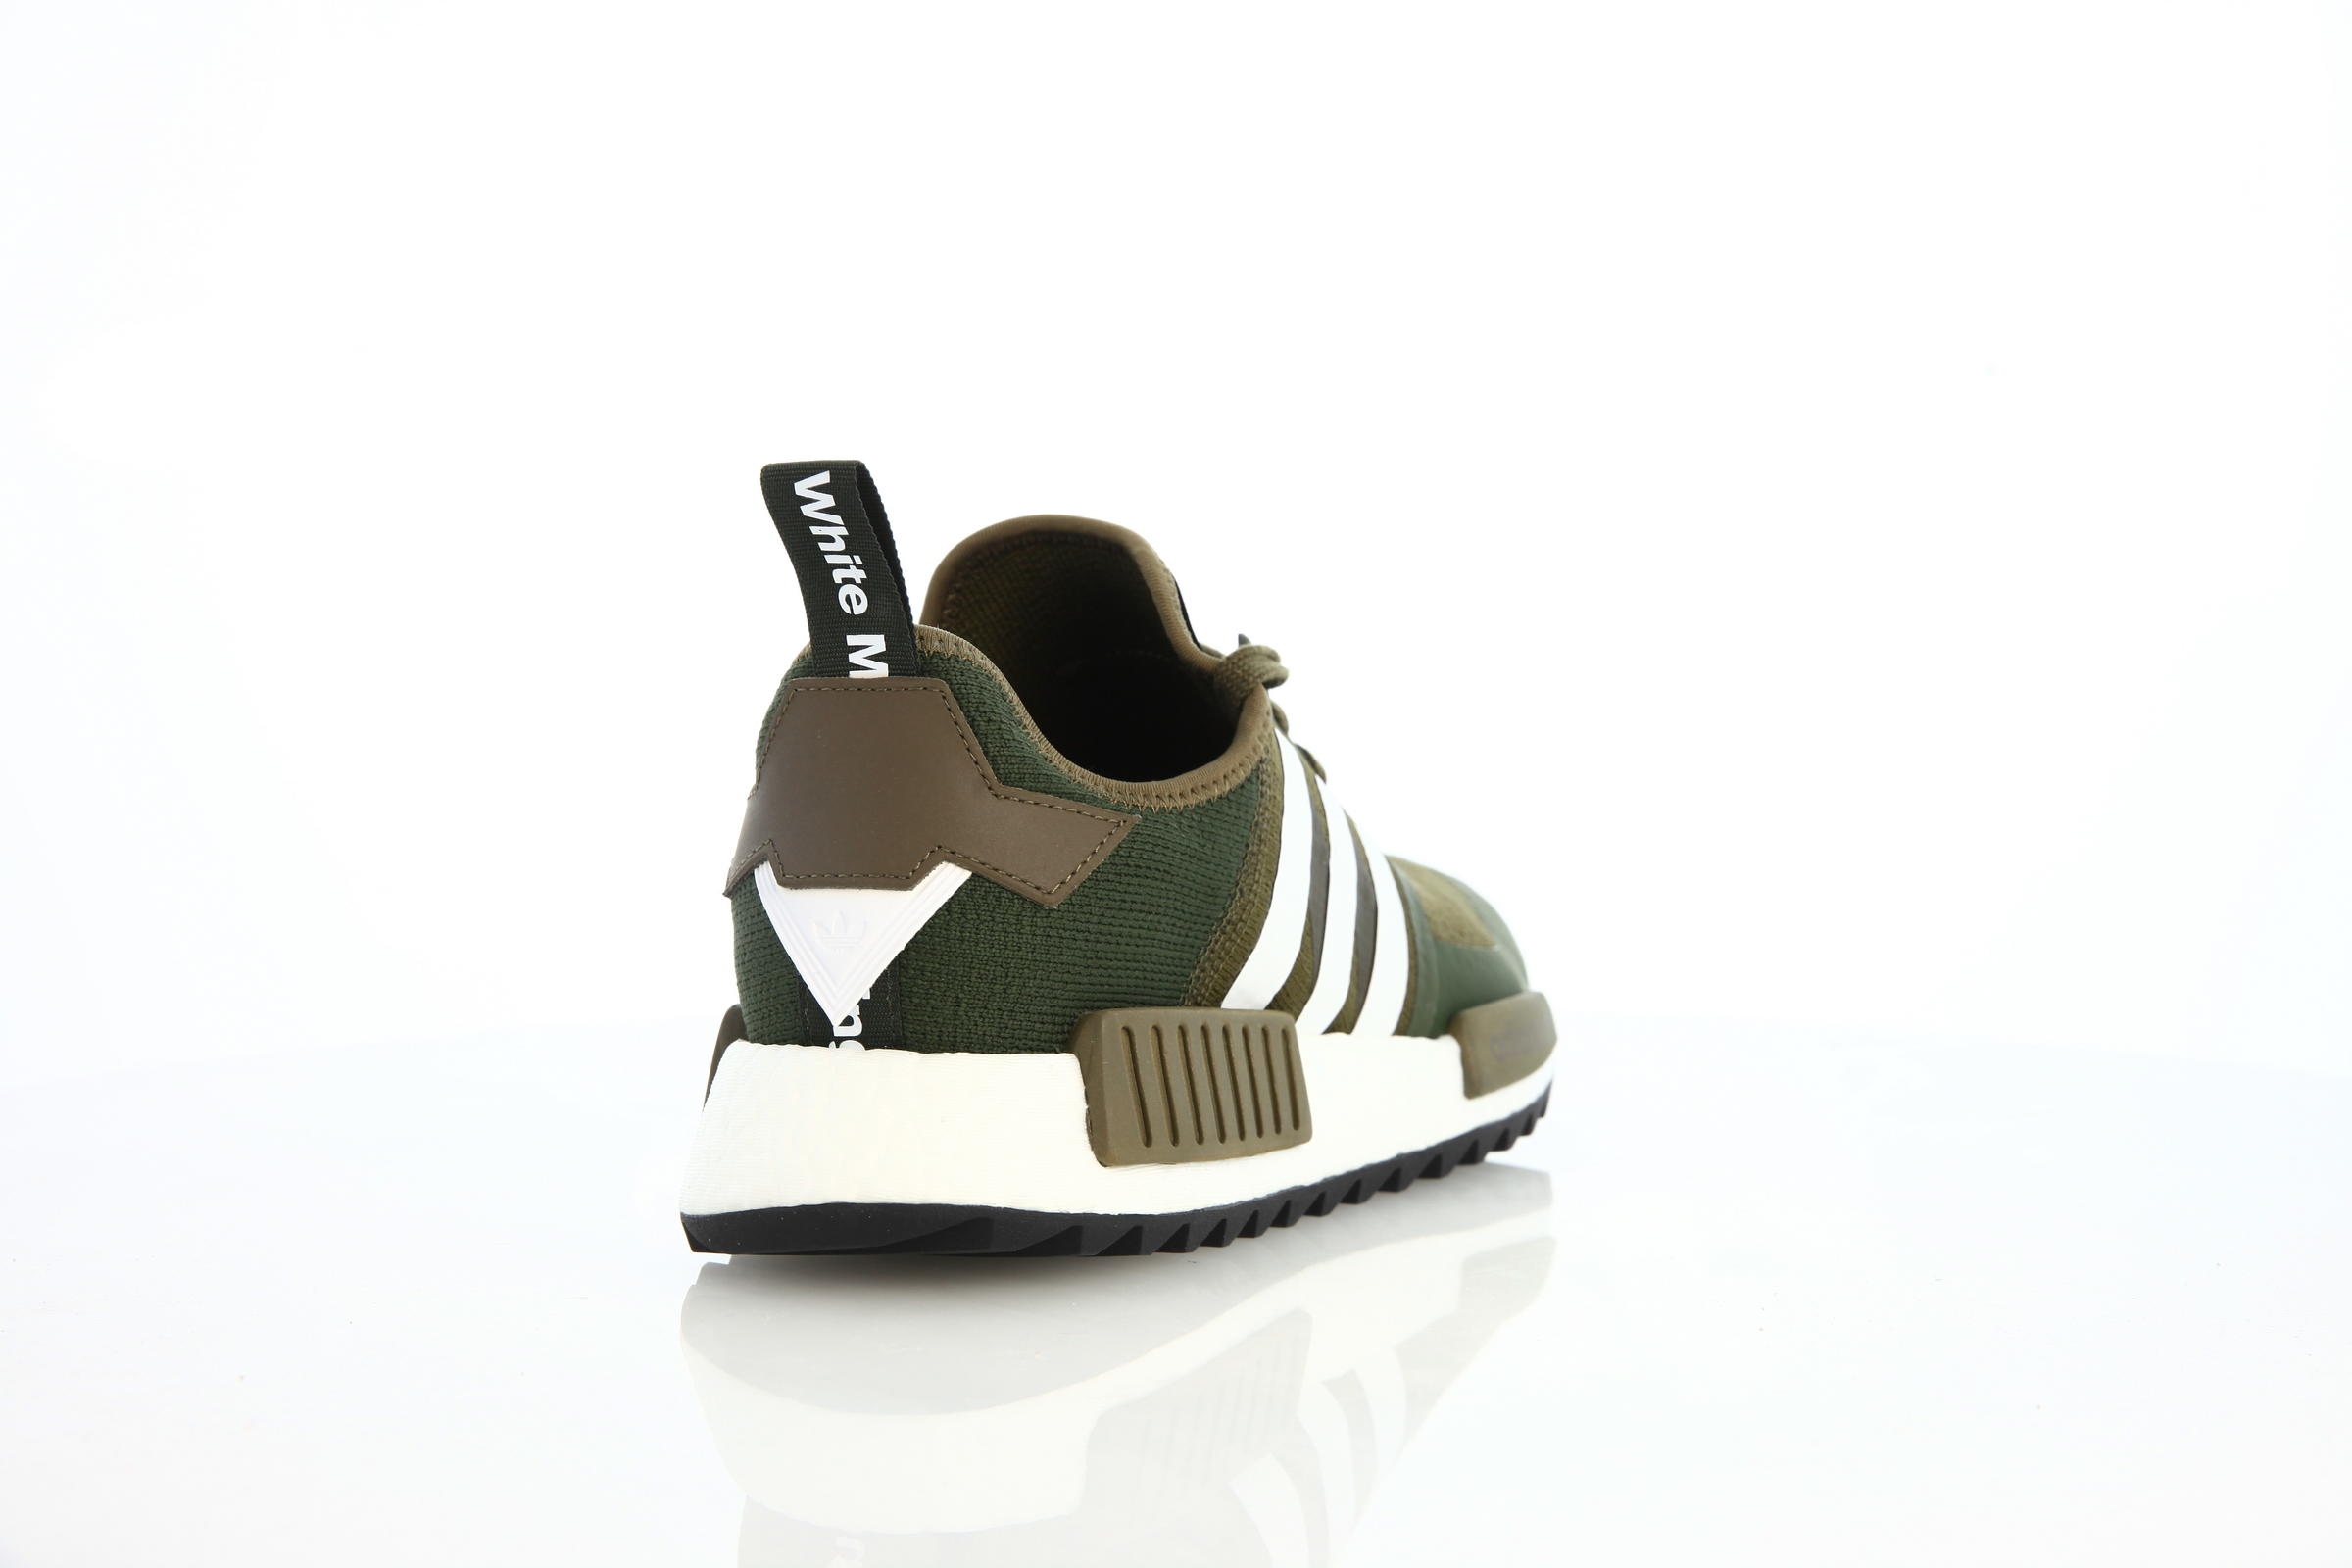 adidas Originals x White Mountaineering Nmd Trail Primeknit "Trace Olive"